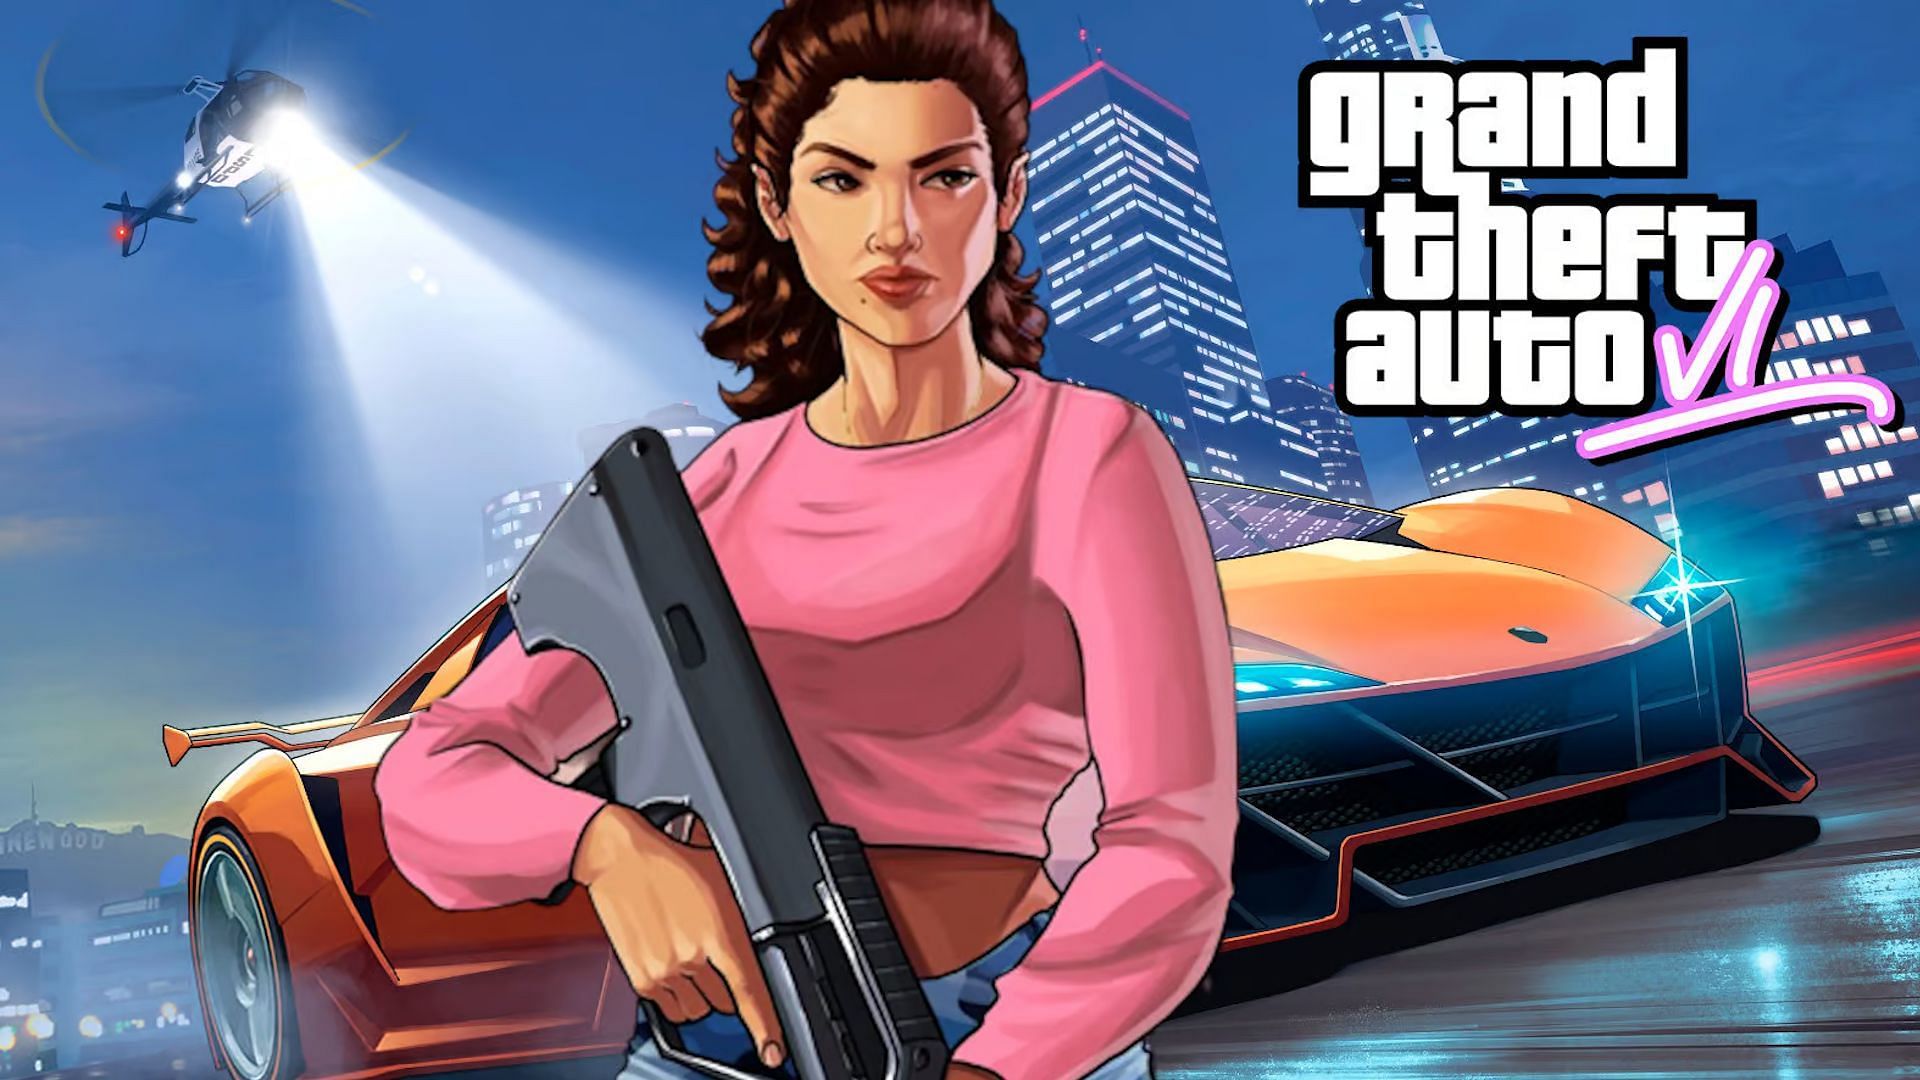 No sign of the next Grand Theft Auto game in October 2023